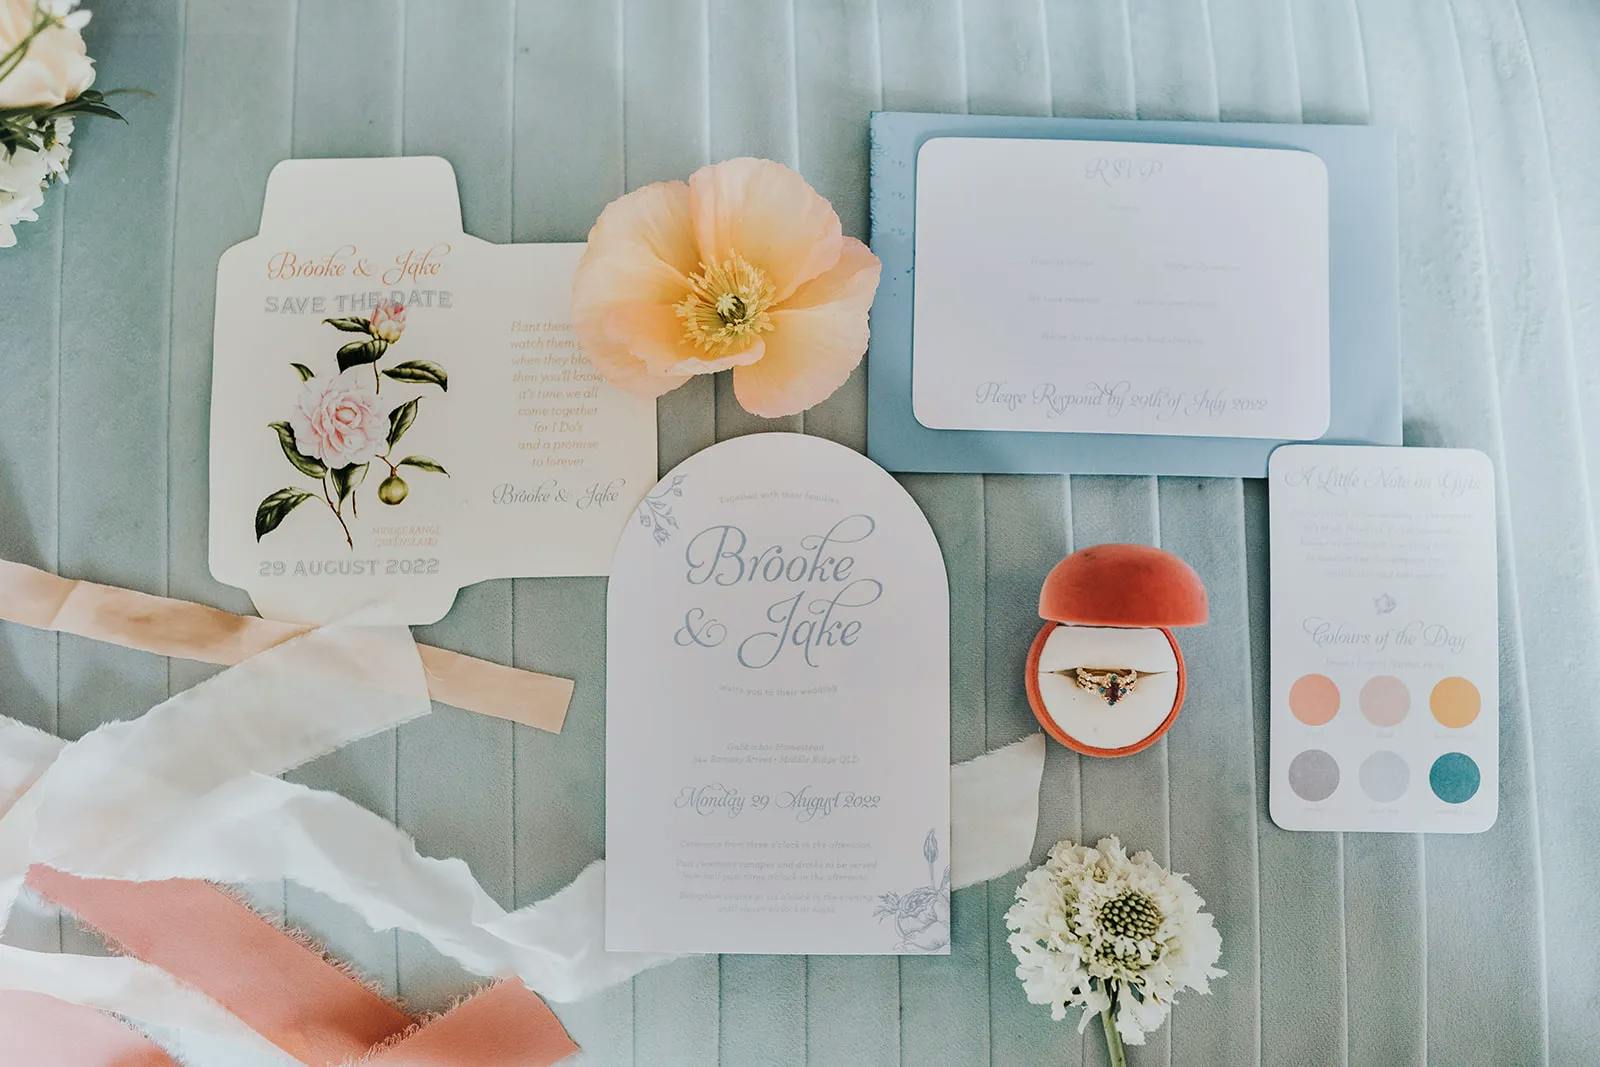 Stationary for wedding day